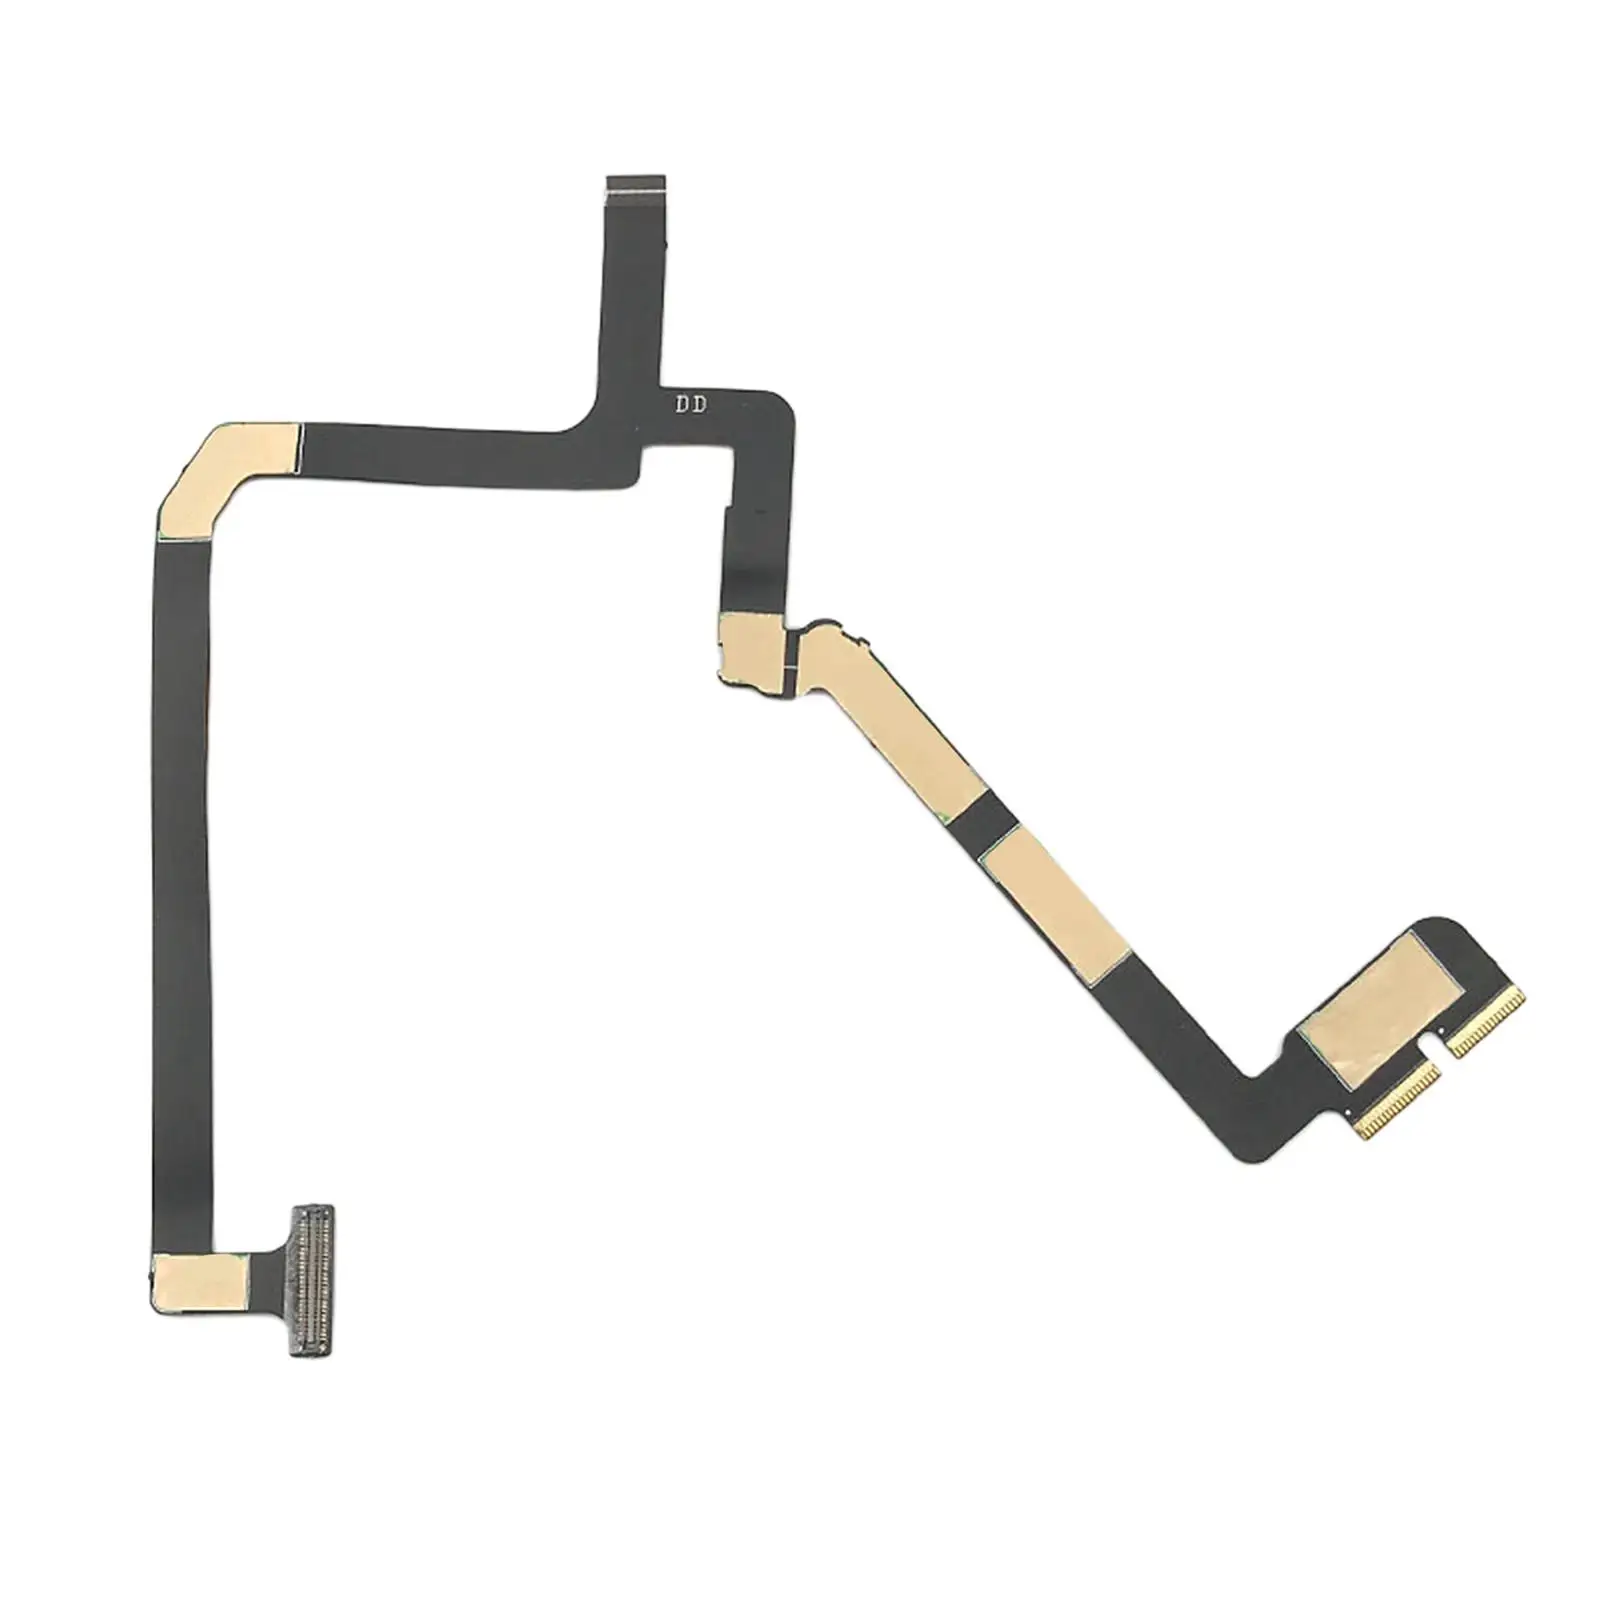 Gimbal Flex Cable Ribbon Professional Gimbal Flat Cable Camera Stabilizer Repair Part DIY Parts Staiblizer Accessory Flat Ribbon